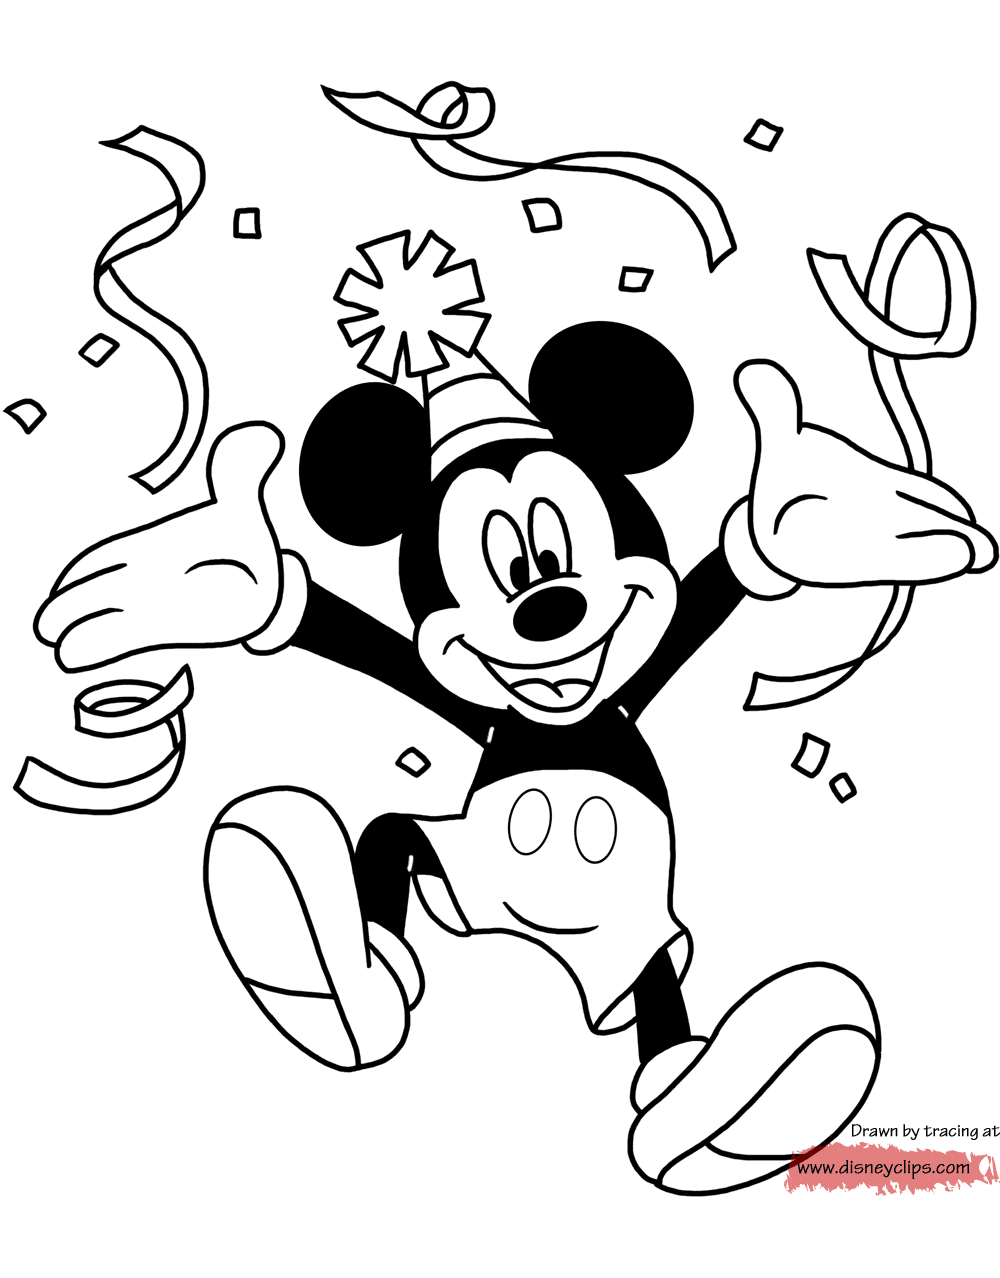 Mickey Mouse Colroing Pages - Mickey Mouse Coloring Pages 5 | Disney Coloring Book